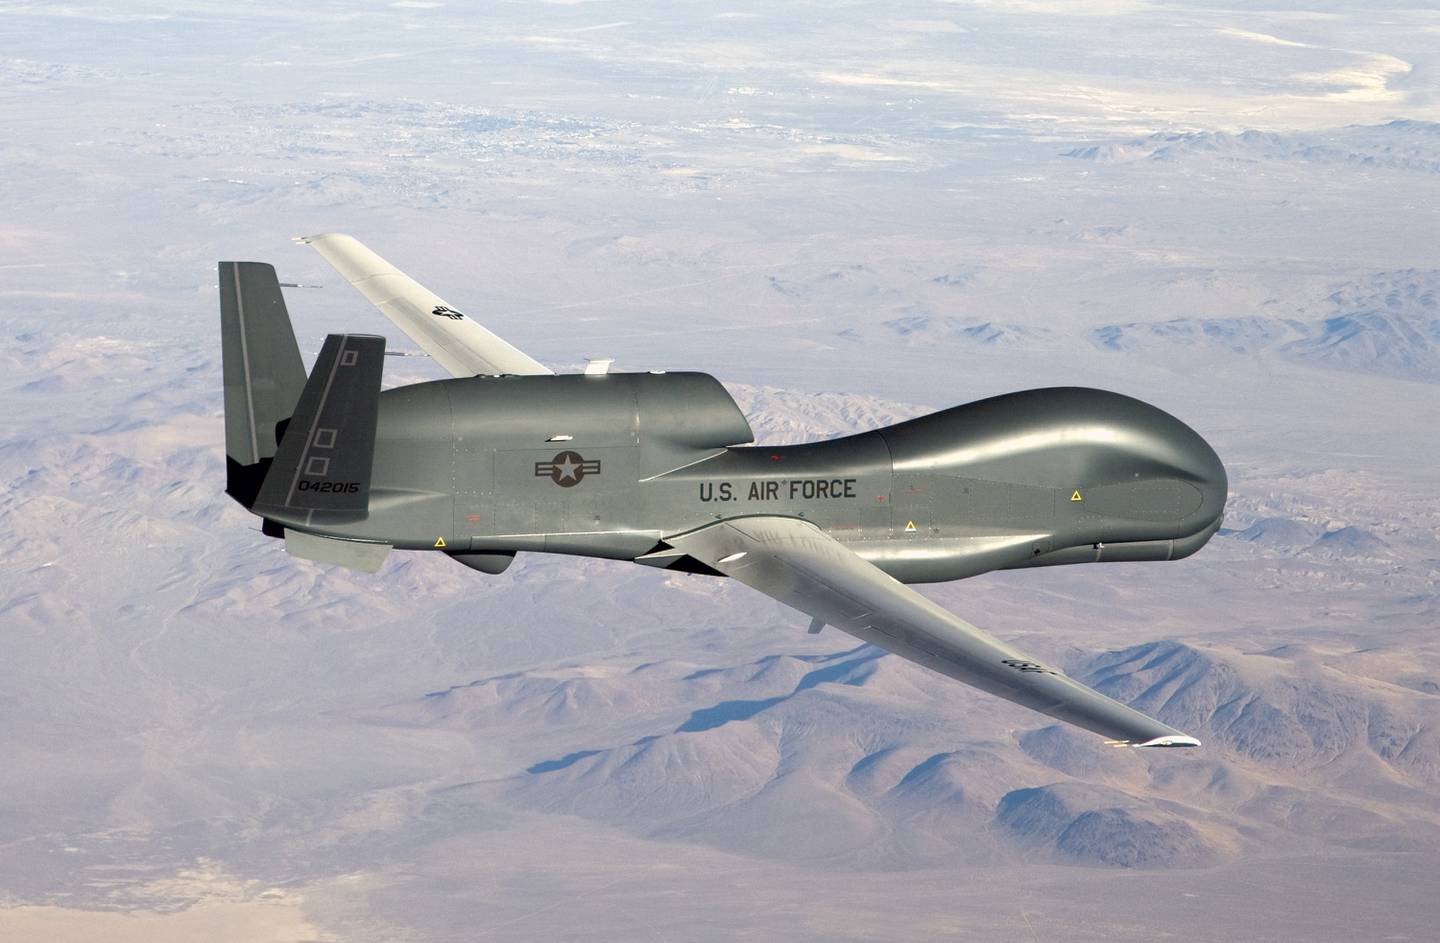 An RQ-4 Global Hawk unmanned aircraft like the one shown is currently flying non-military mapping missions over South, Central America and the Caribbean at the request of partner nations in the region. Photo: US Air Force)